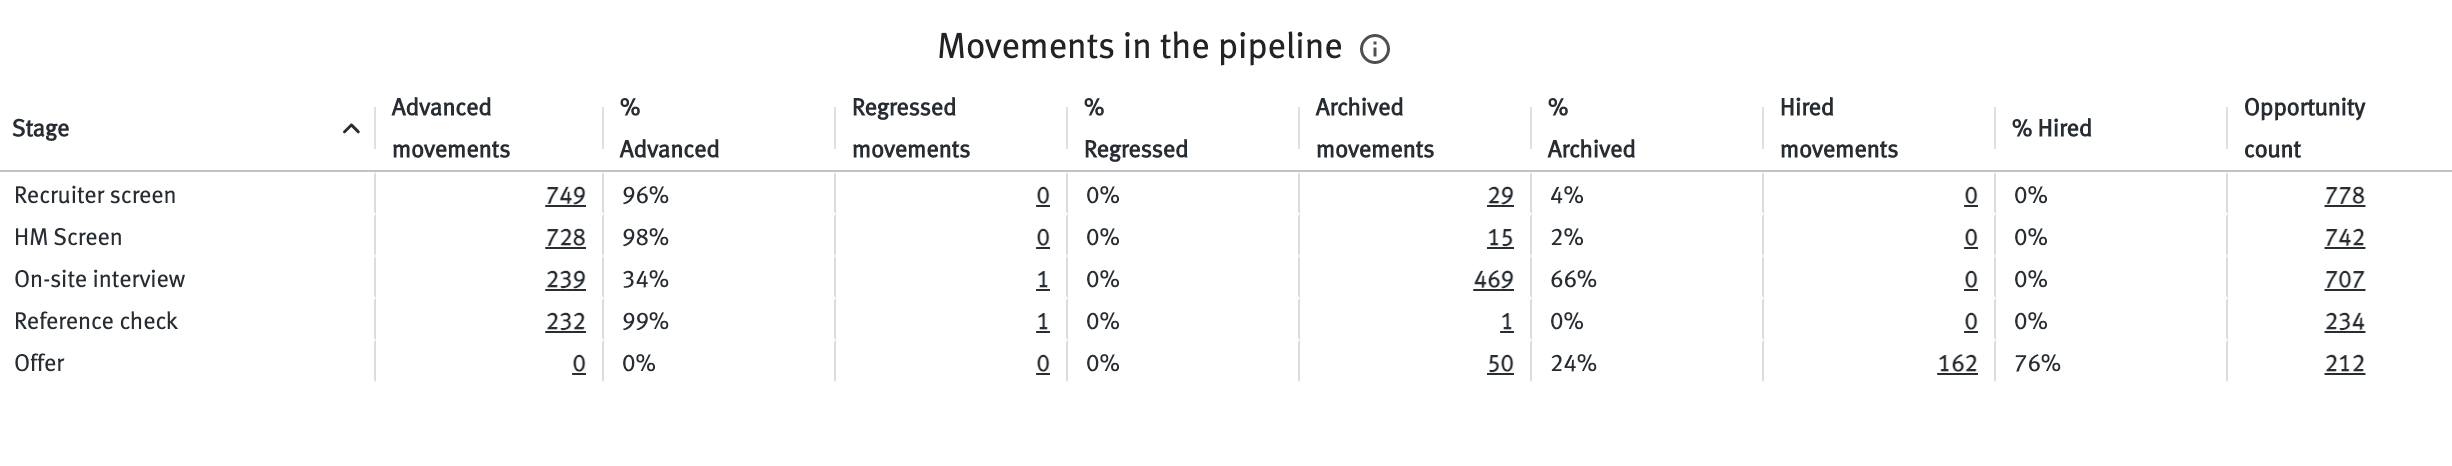 Movements in the pipeline table